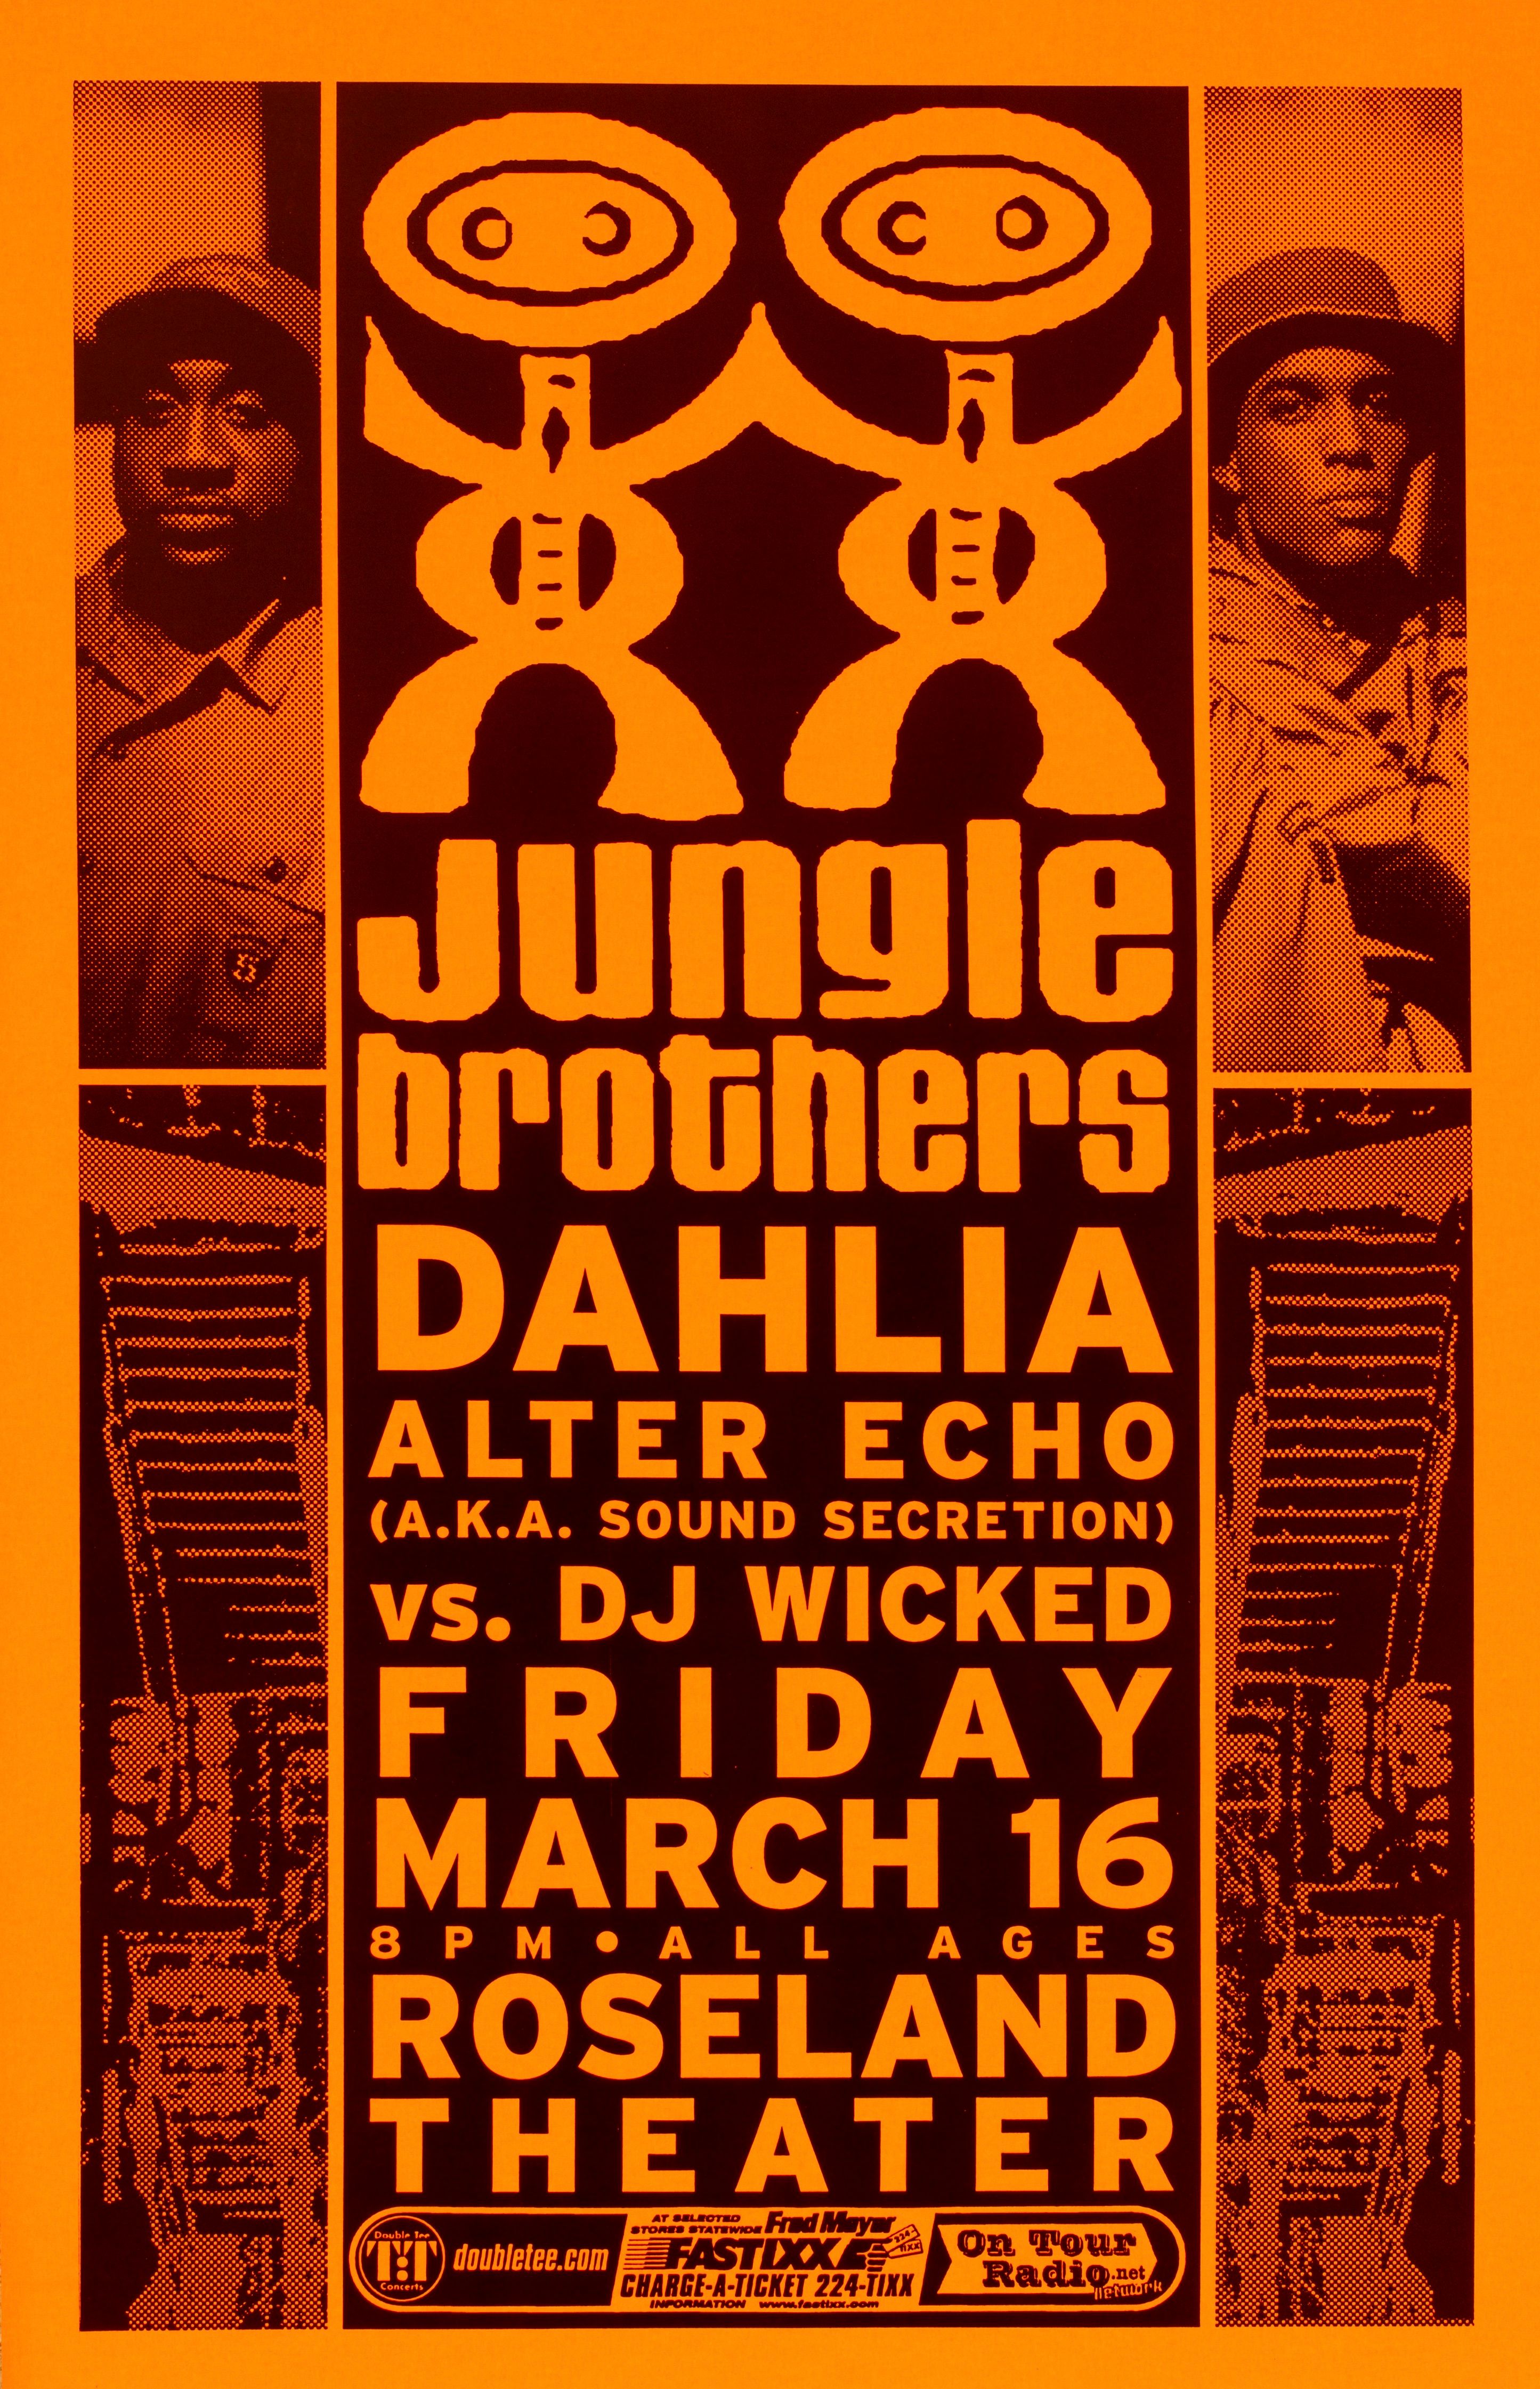 MXP-210.6 Jungle Brothers 2001 Roseland Theater  Mar 16 Concert Poster